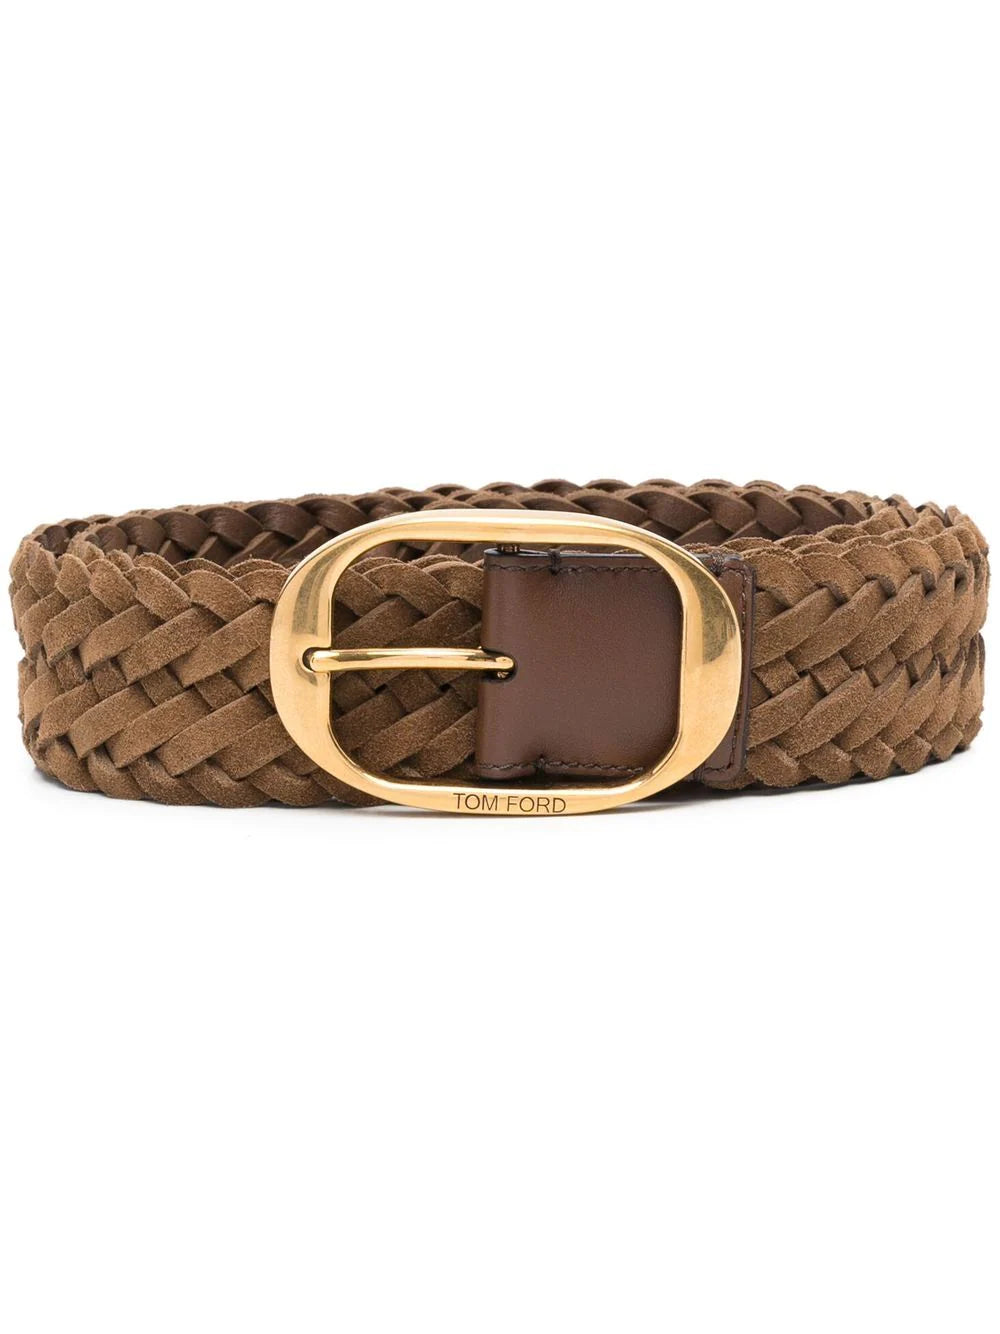 TOM FORD Woven Leather Belt